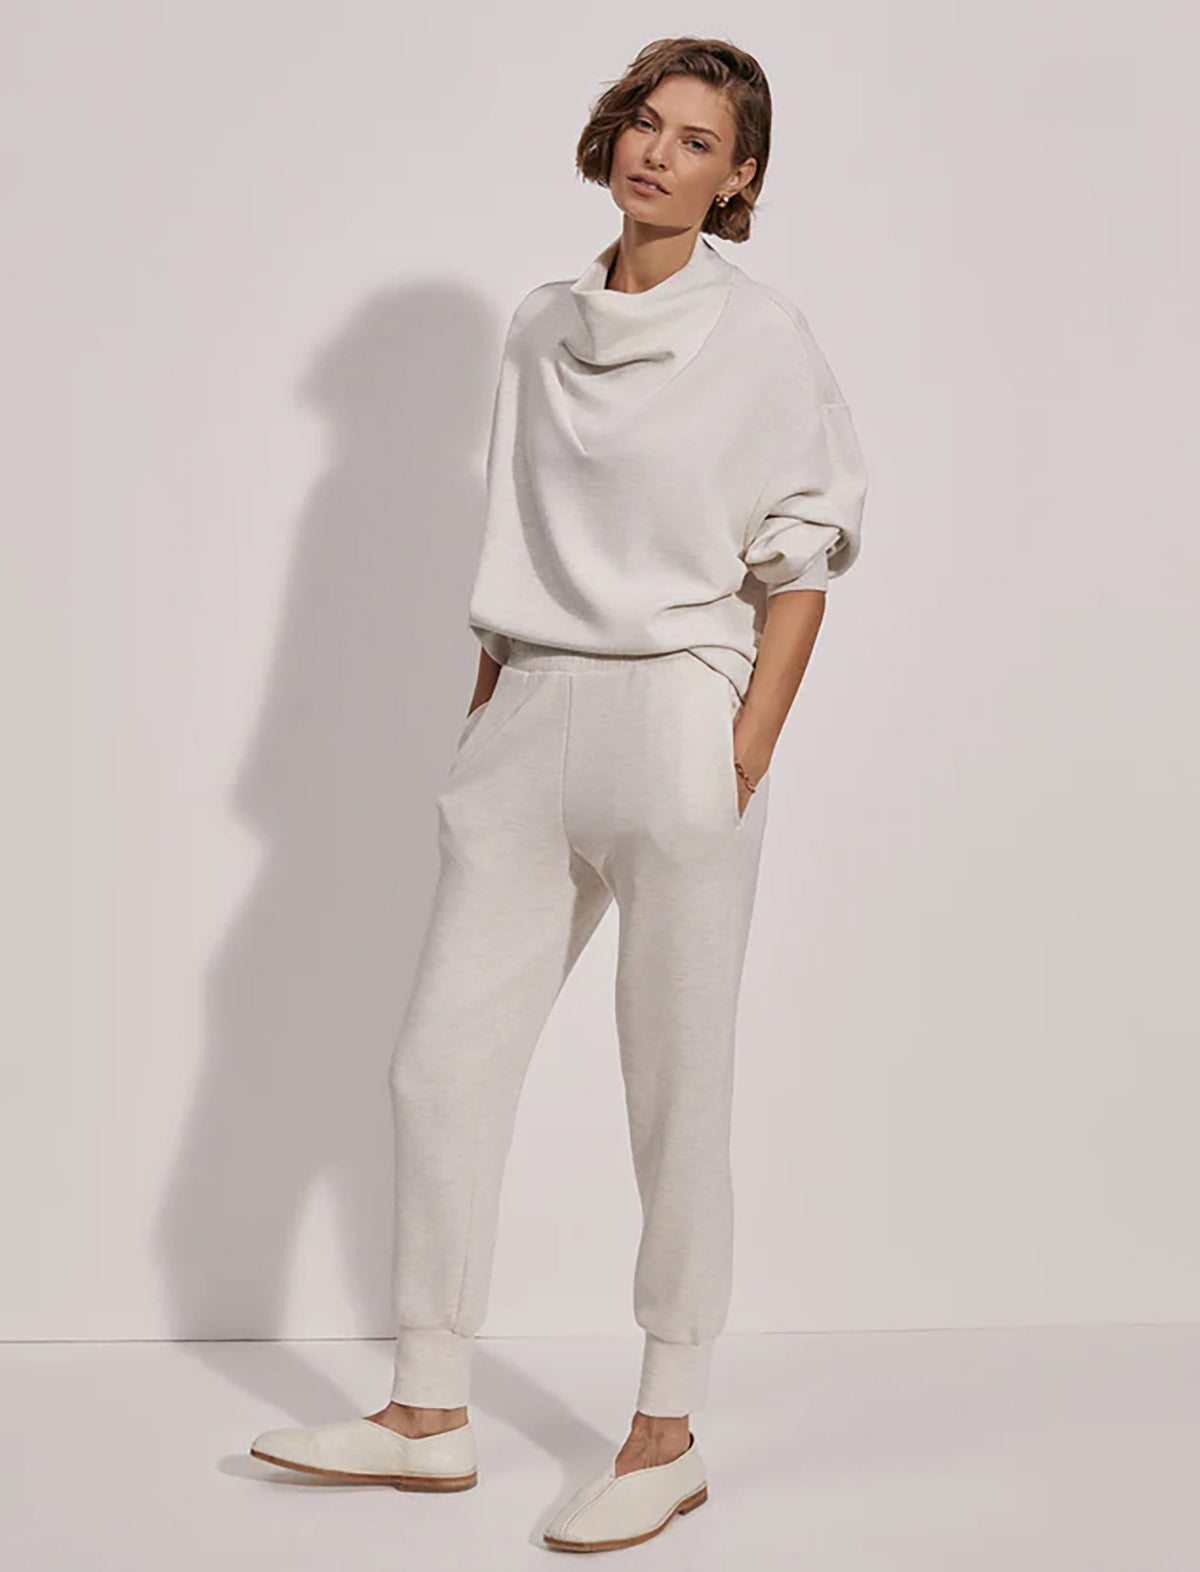 VARLEY DoubleSoft™️ The Slim Cuff Pant 25" in Ivory Marl